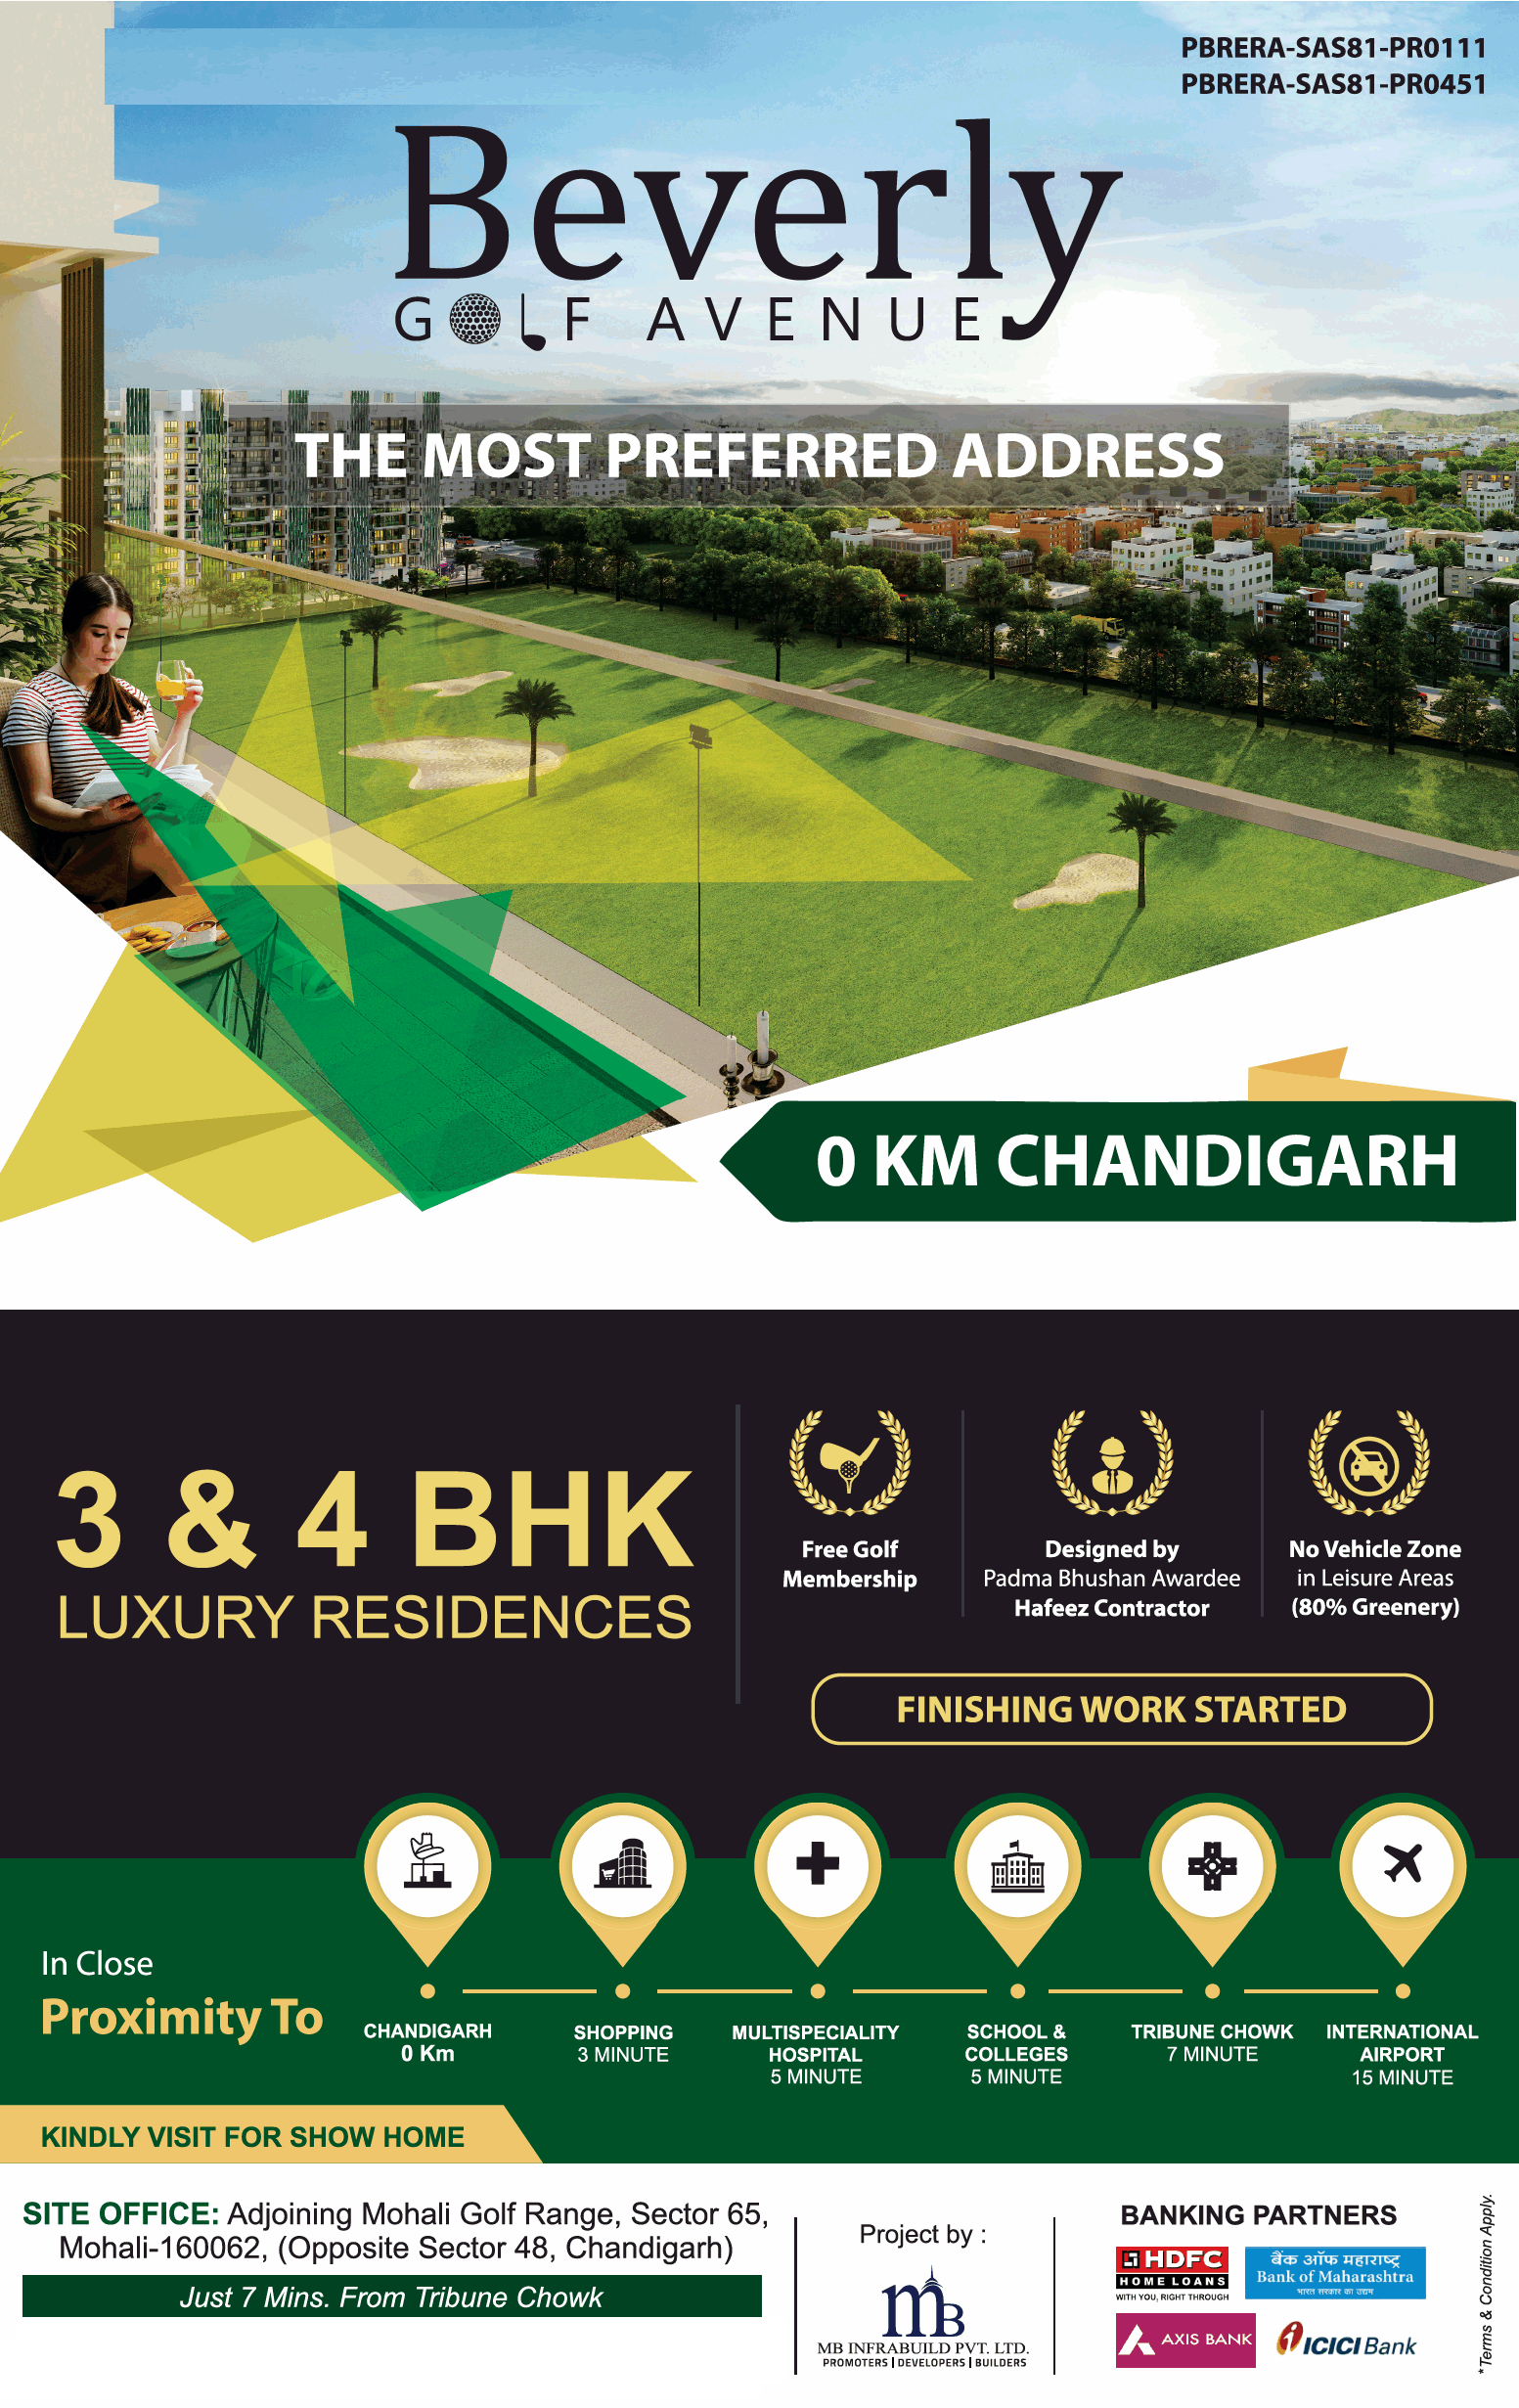 3 and 4 BHK  luxury residences at MB Beverly Golf Avenue,  Mohali Update